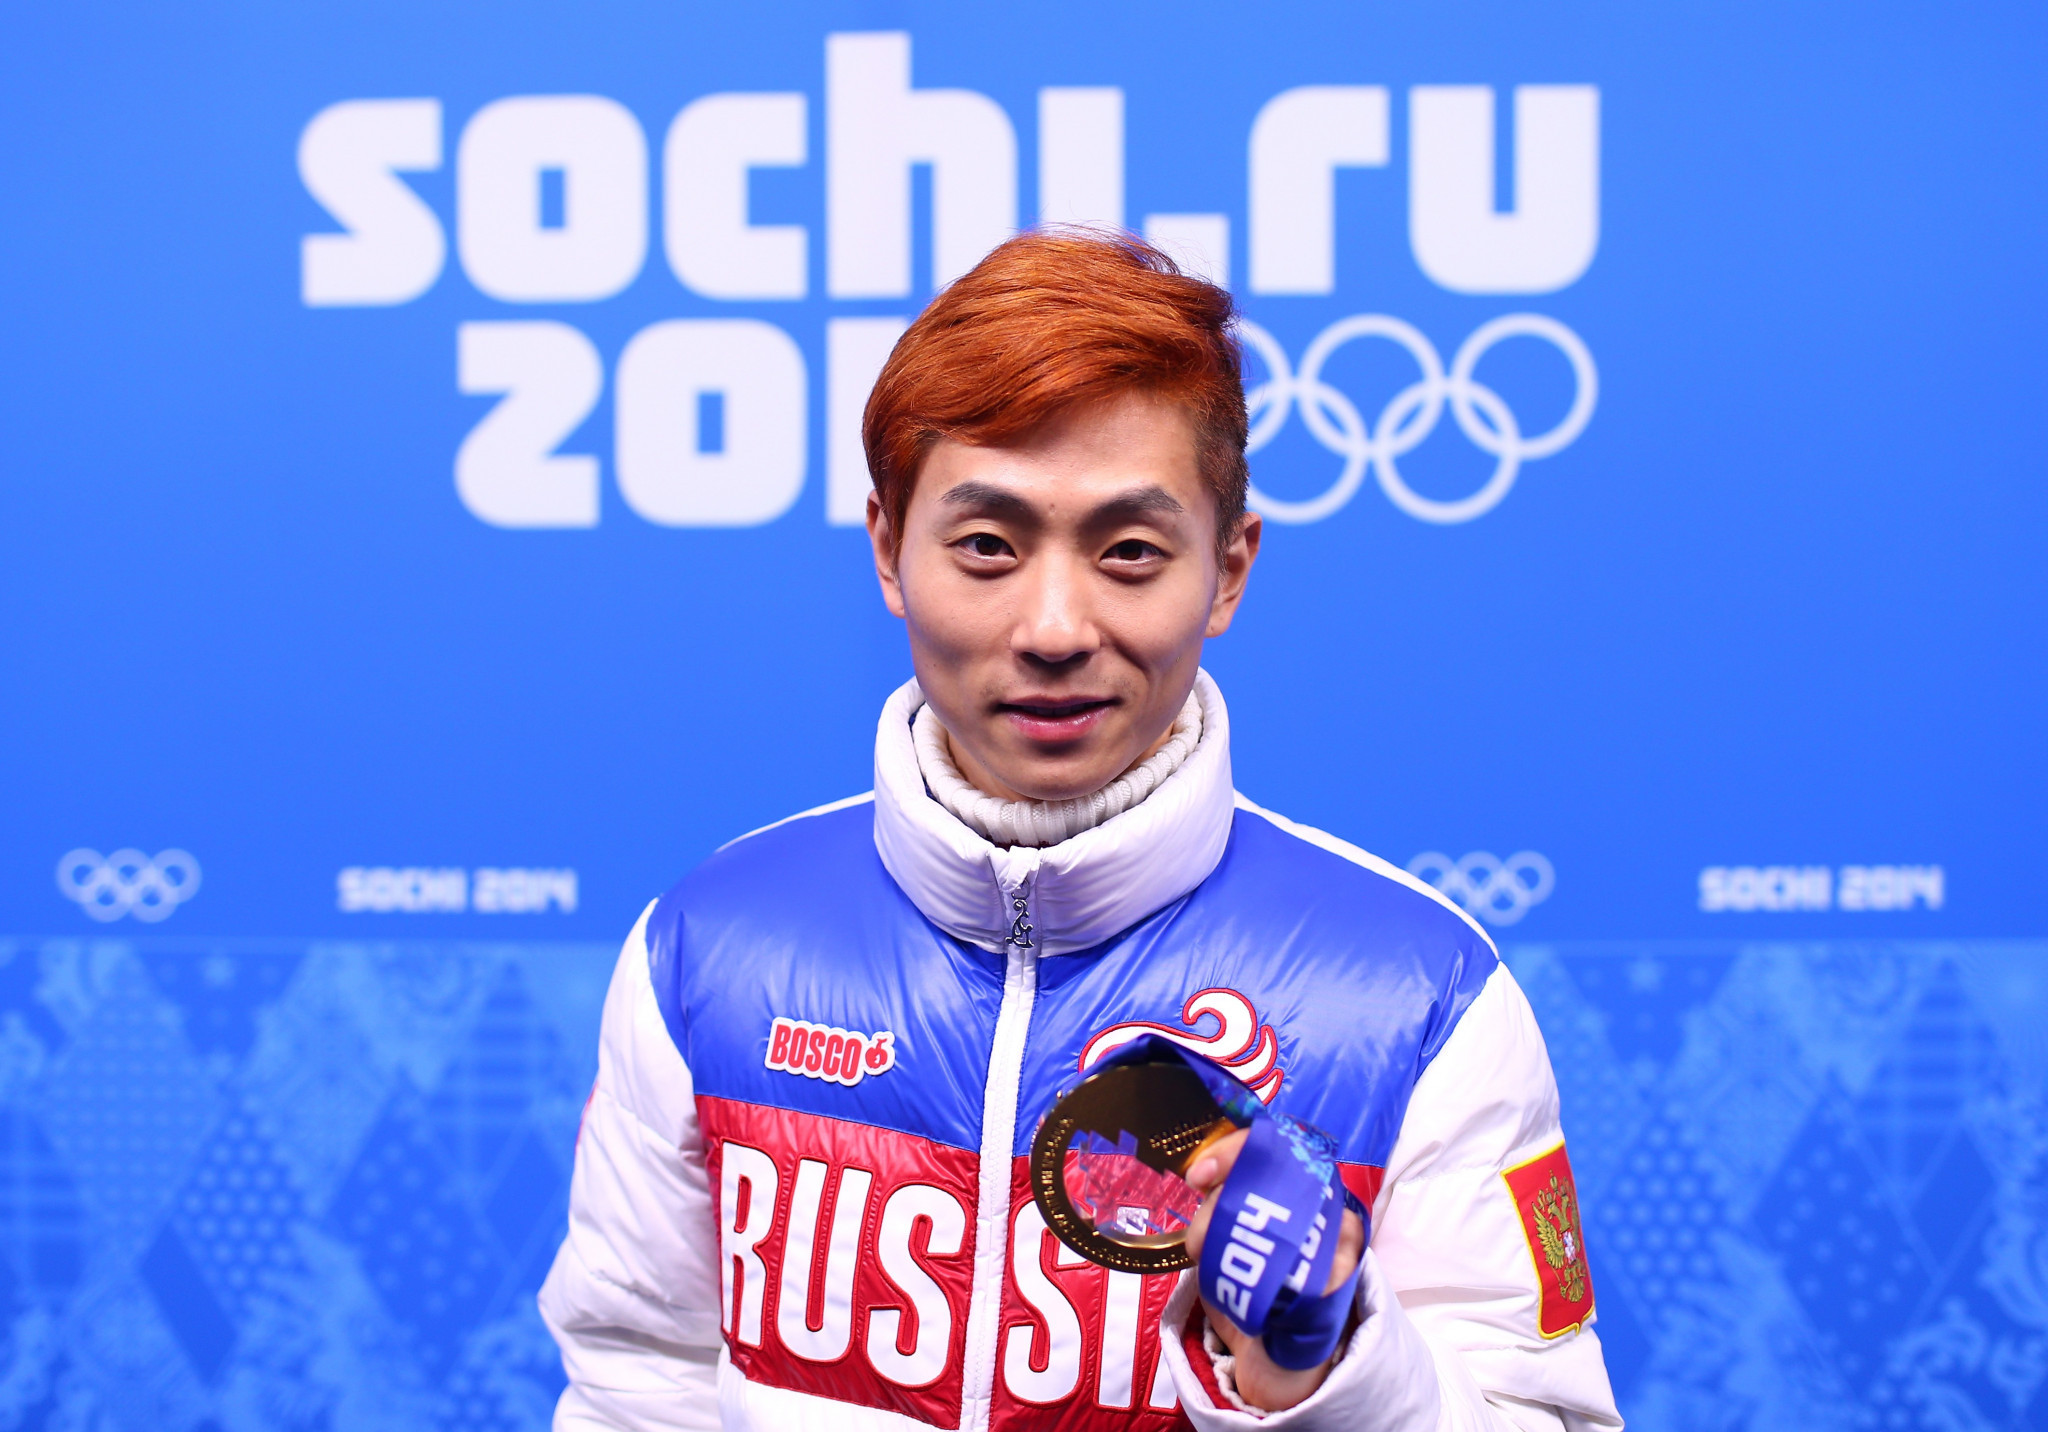 Viktor An claimed three Olympic golds for Russia at Sochi 2014 but has found his path to coaching jobs in his native South Korea blocked ©Getty Images 